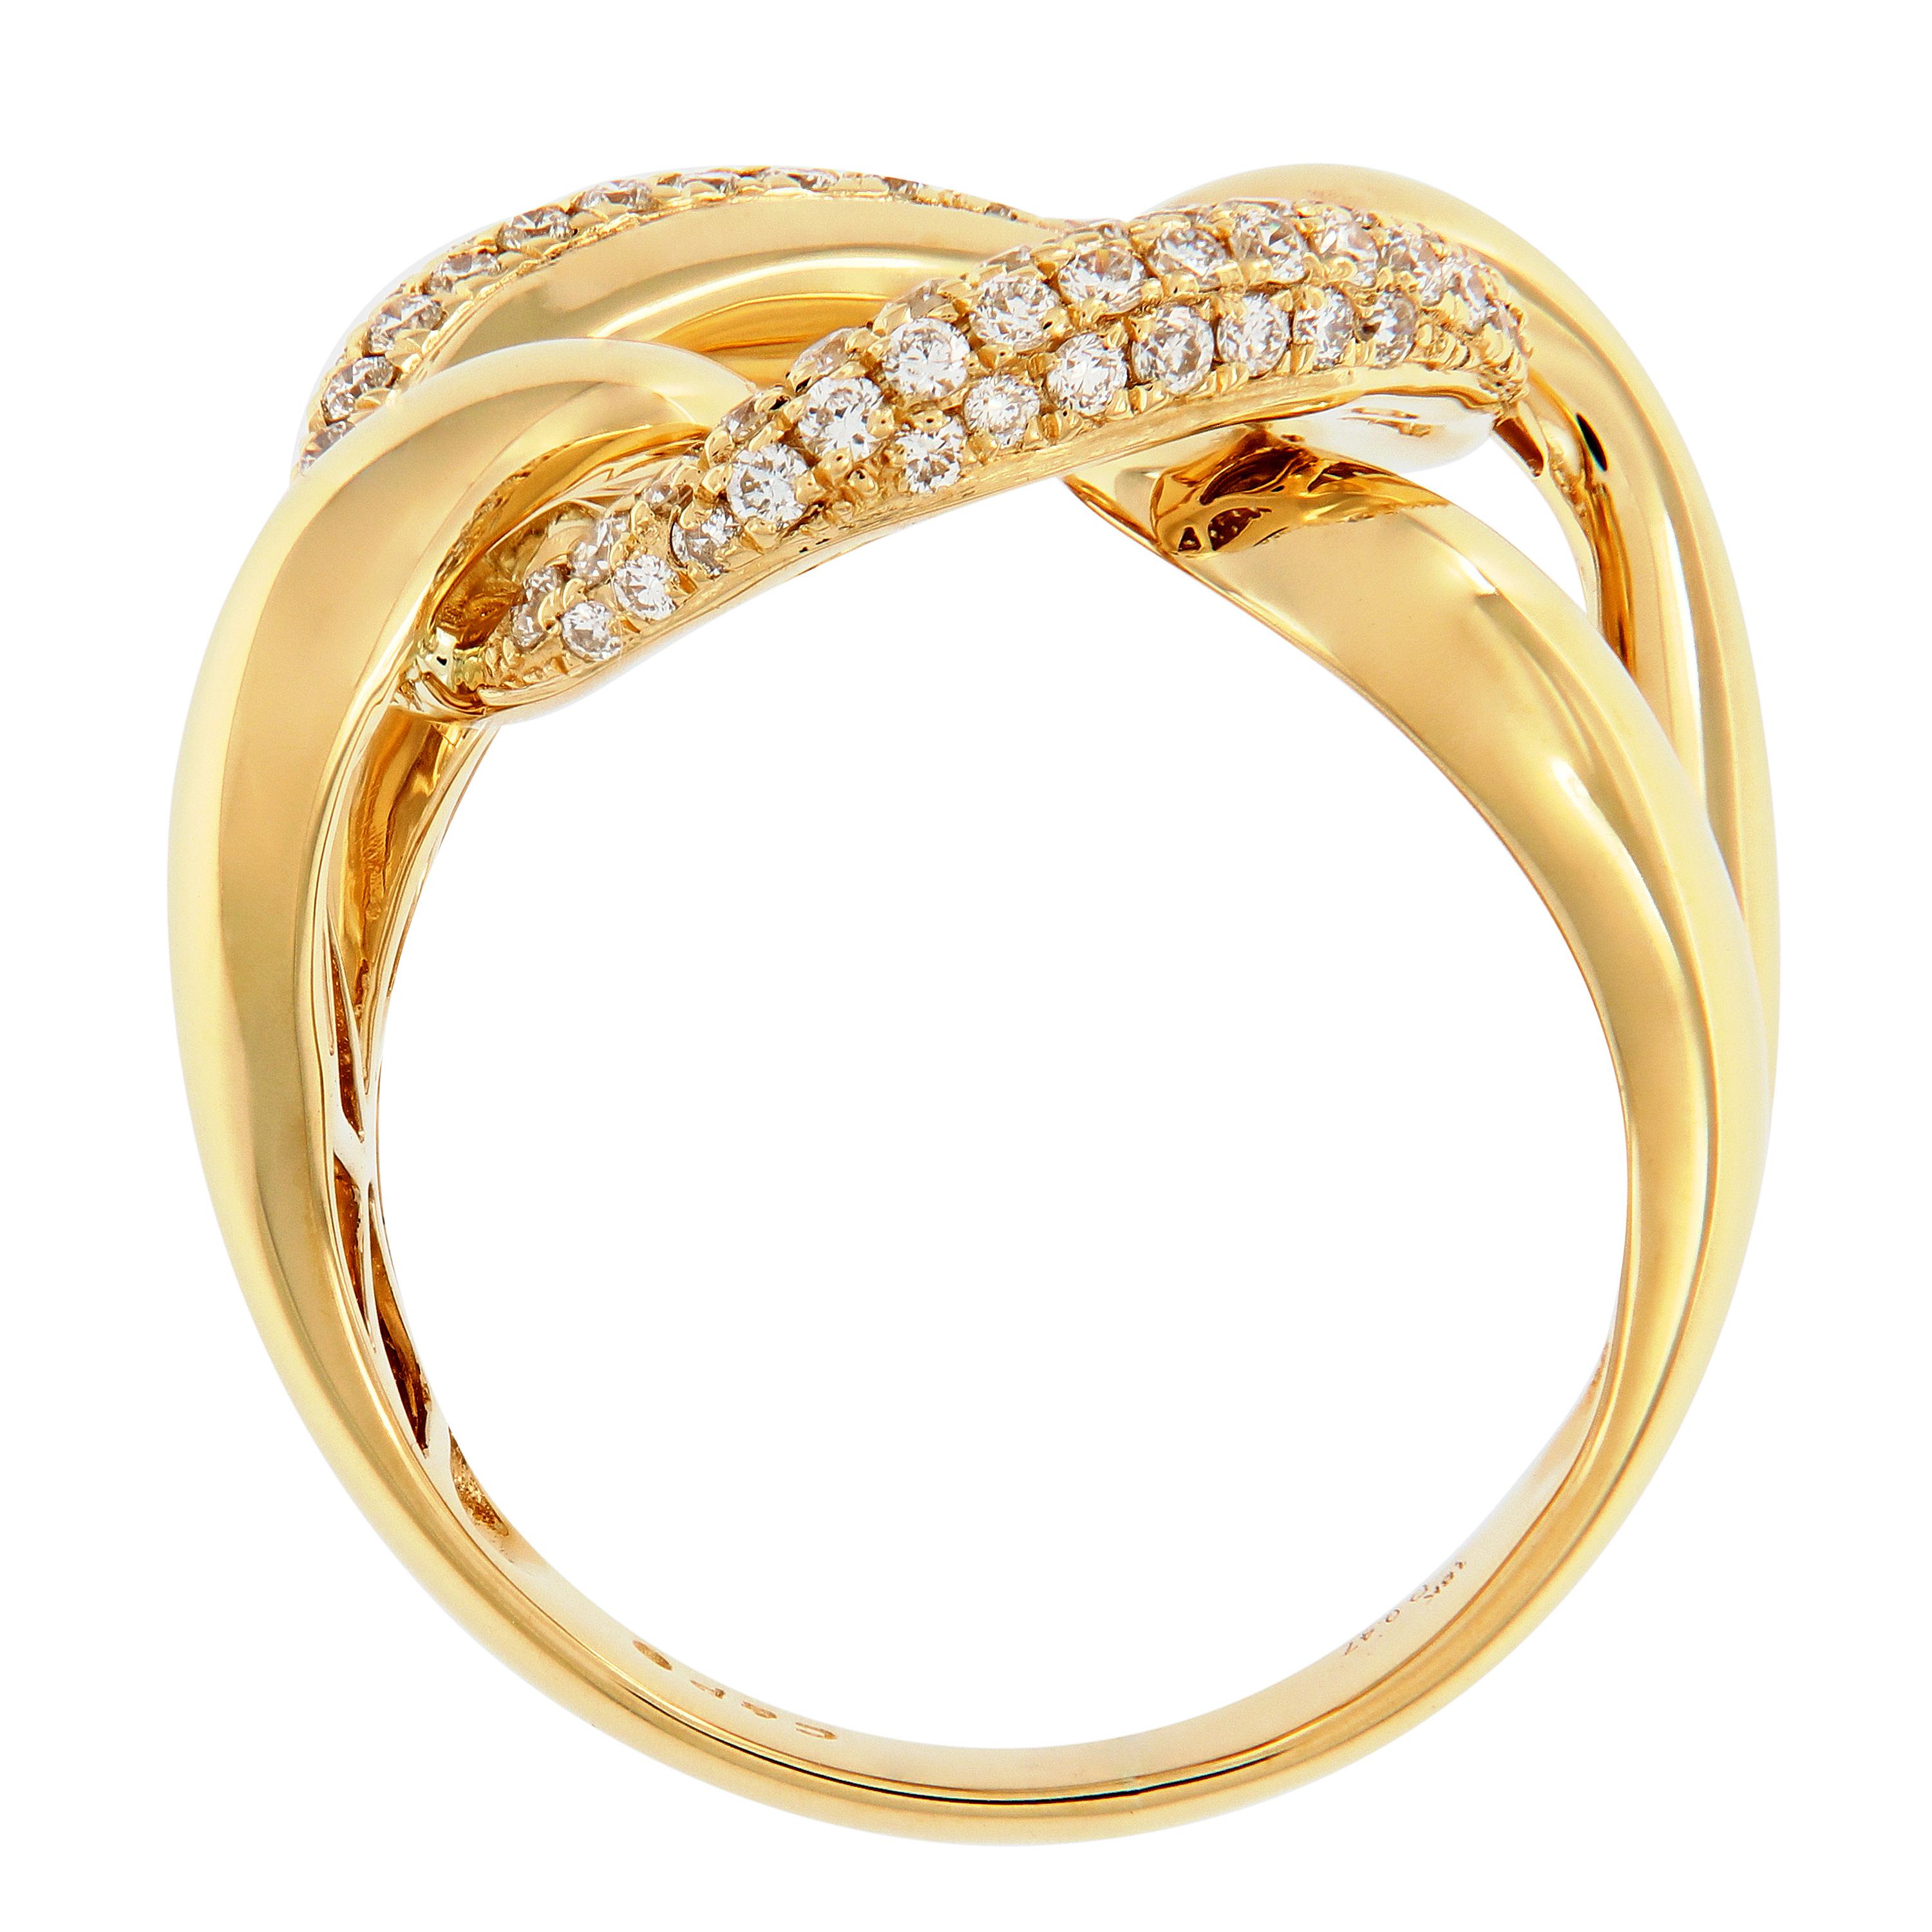 Contemporary open knot ring crafted in 18k yellow gold accented with pave set diamonds. Top of ring measures approximately 16.4mm x 21mm. Ring size 6.25. Weighs 7.5 grams.
Diamonds 0.47 cttw